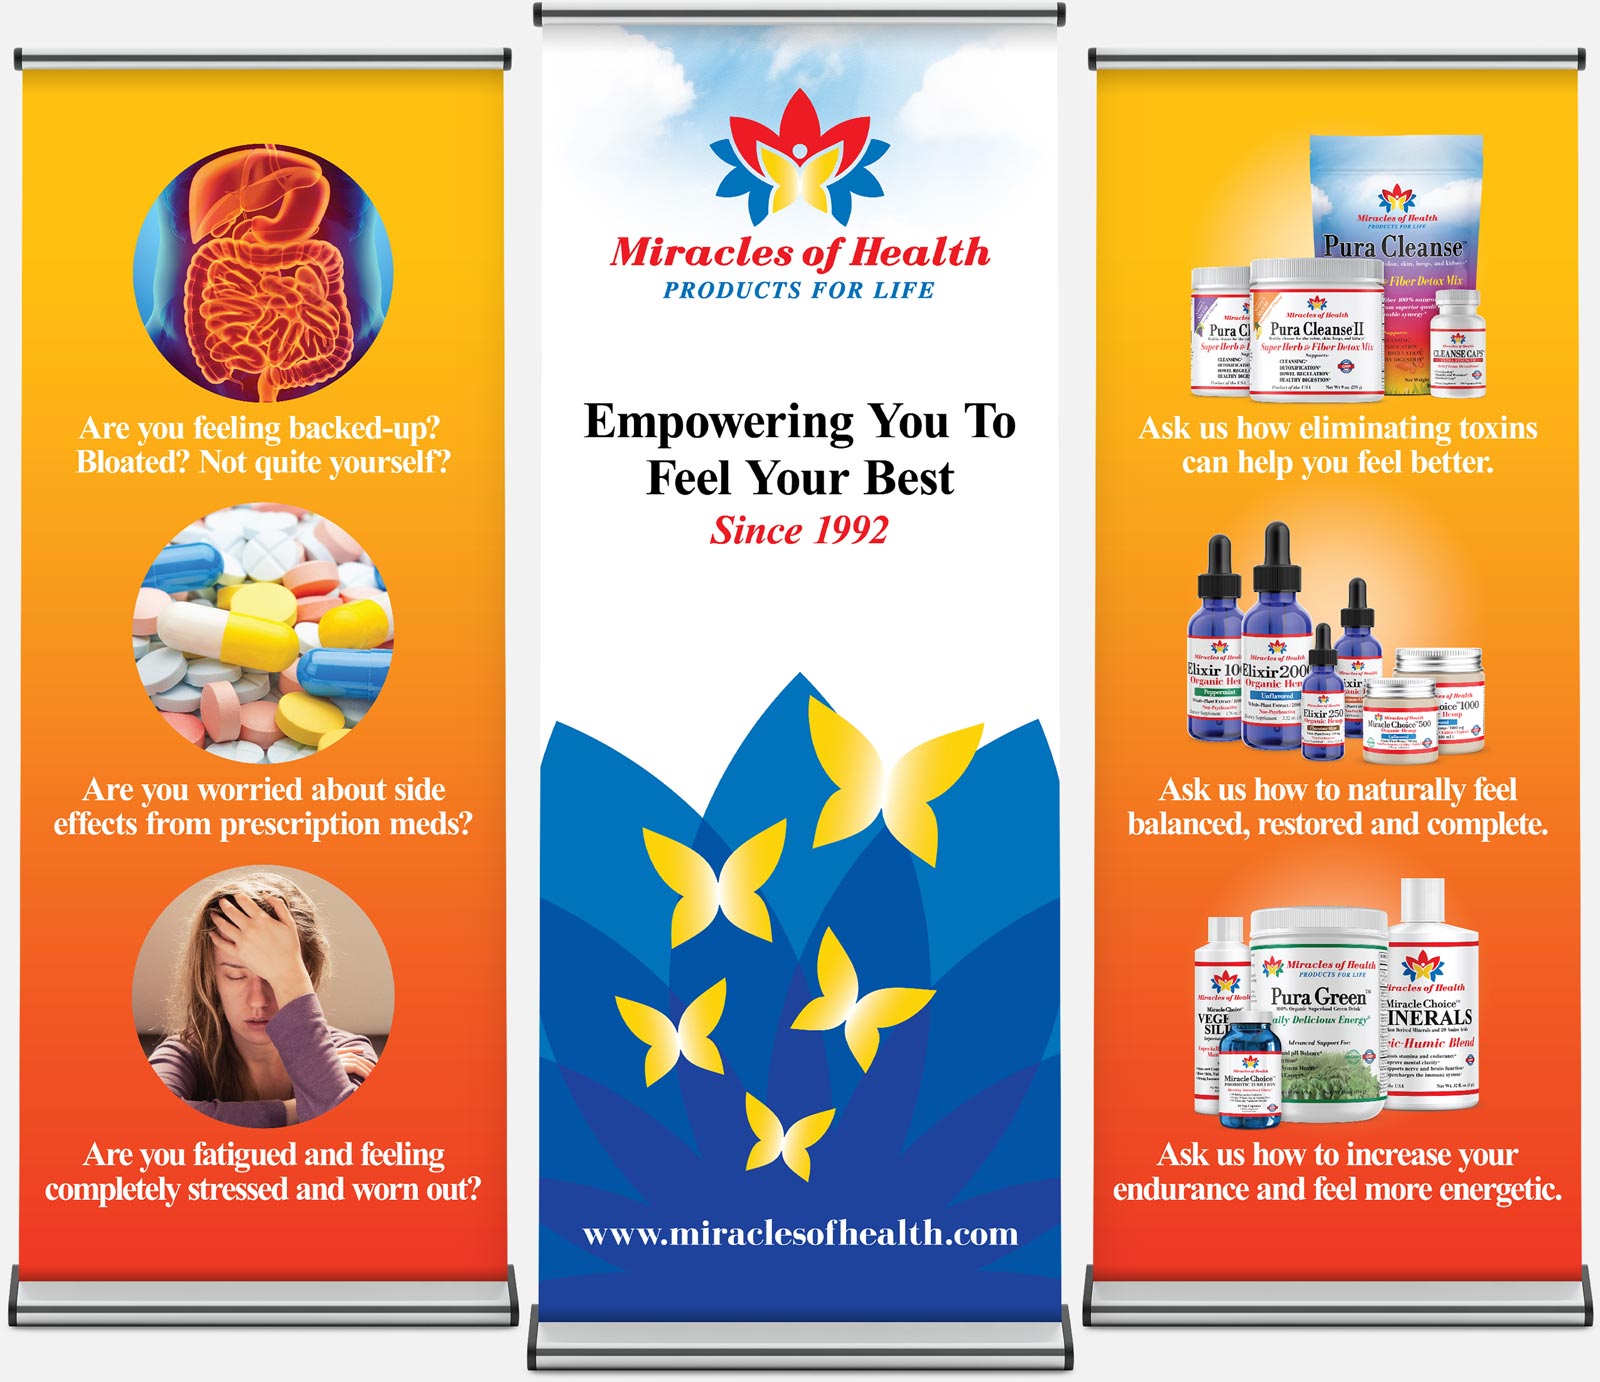 Branding retractable banner event displays for Miracles of Health